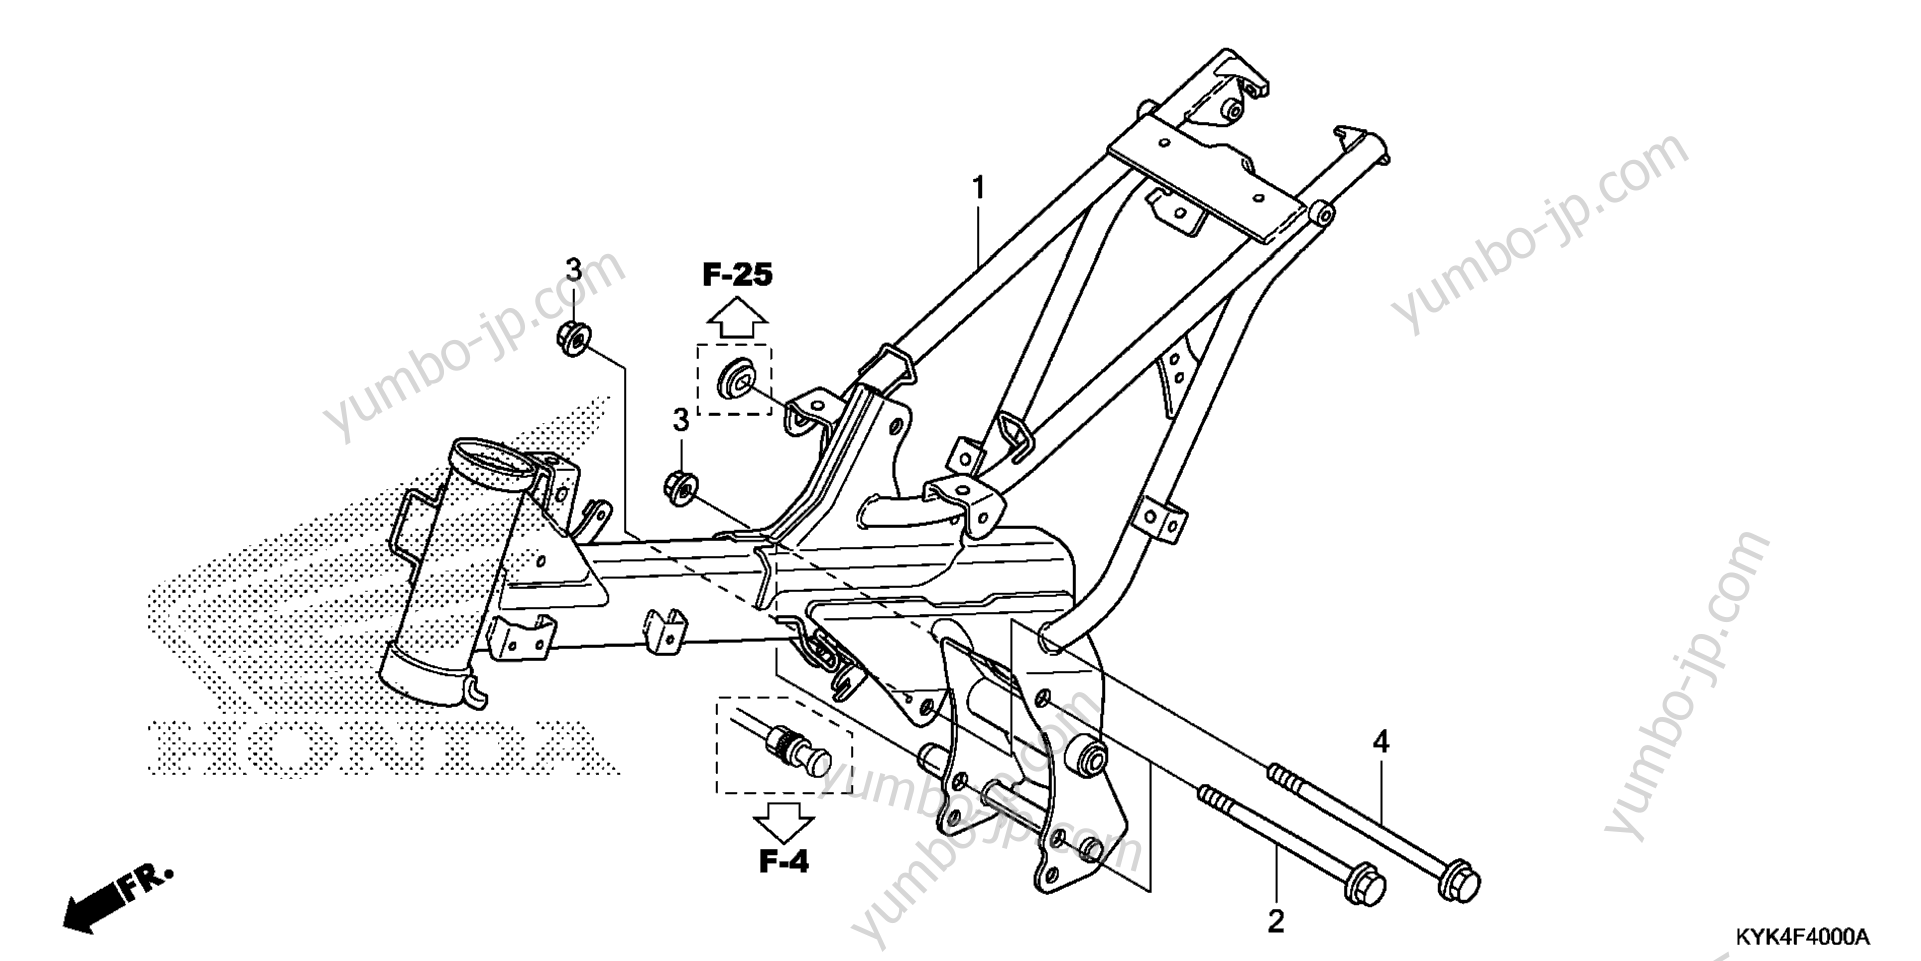 FRAME for motorcycles HONDA CRF110F AC 2014 year